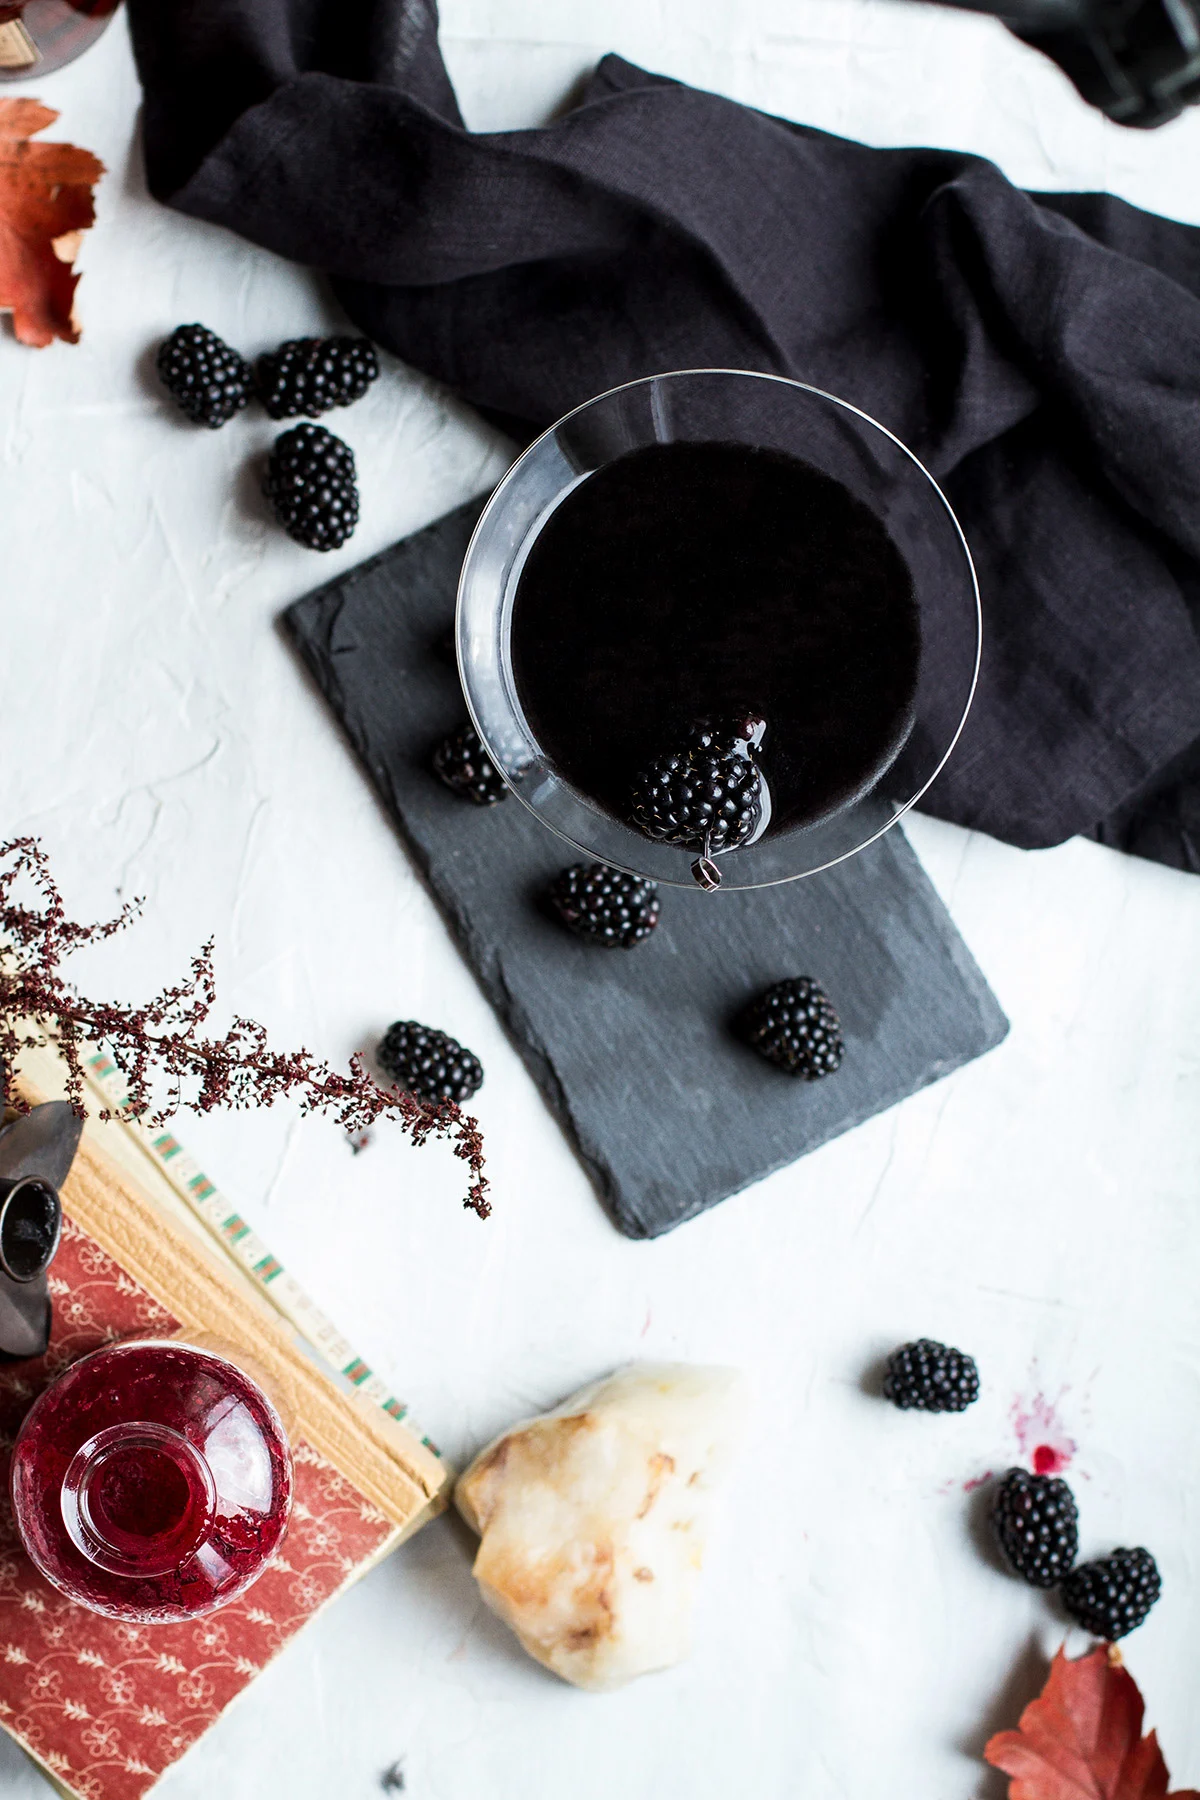 A blackberry martini seen from above.